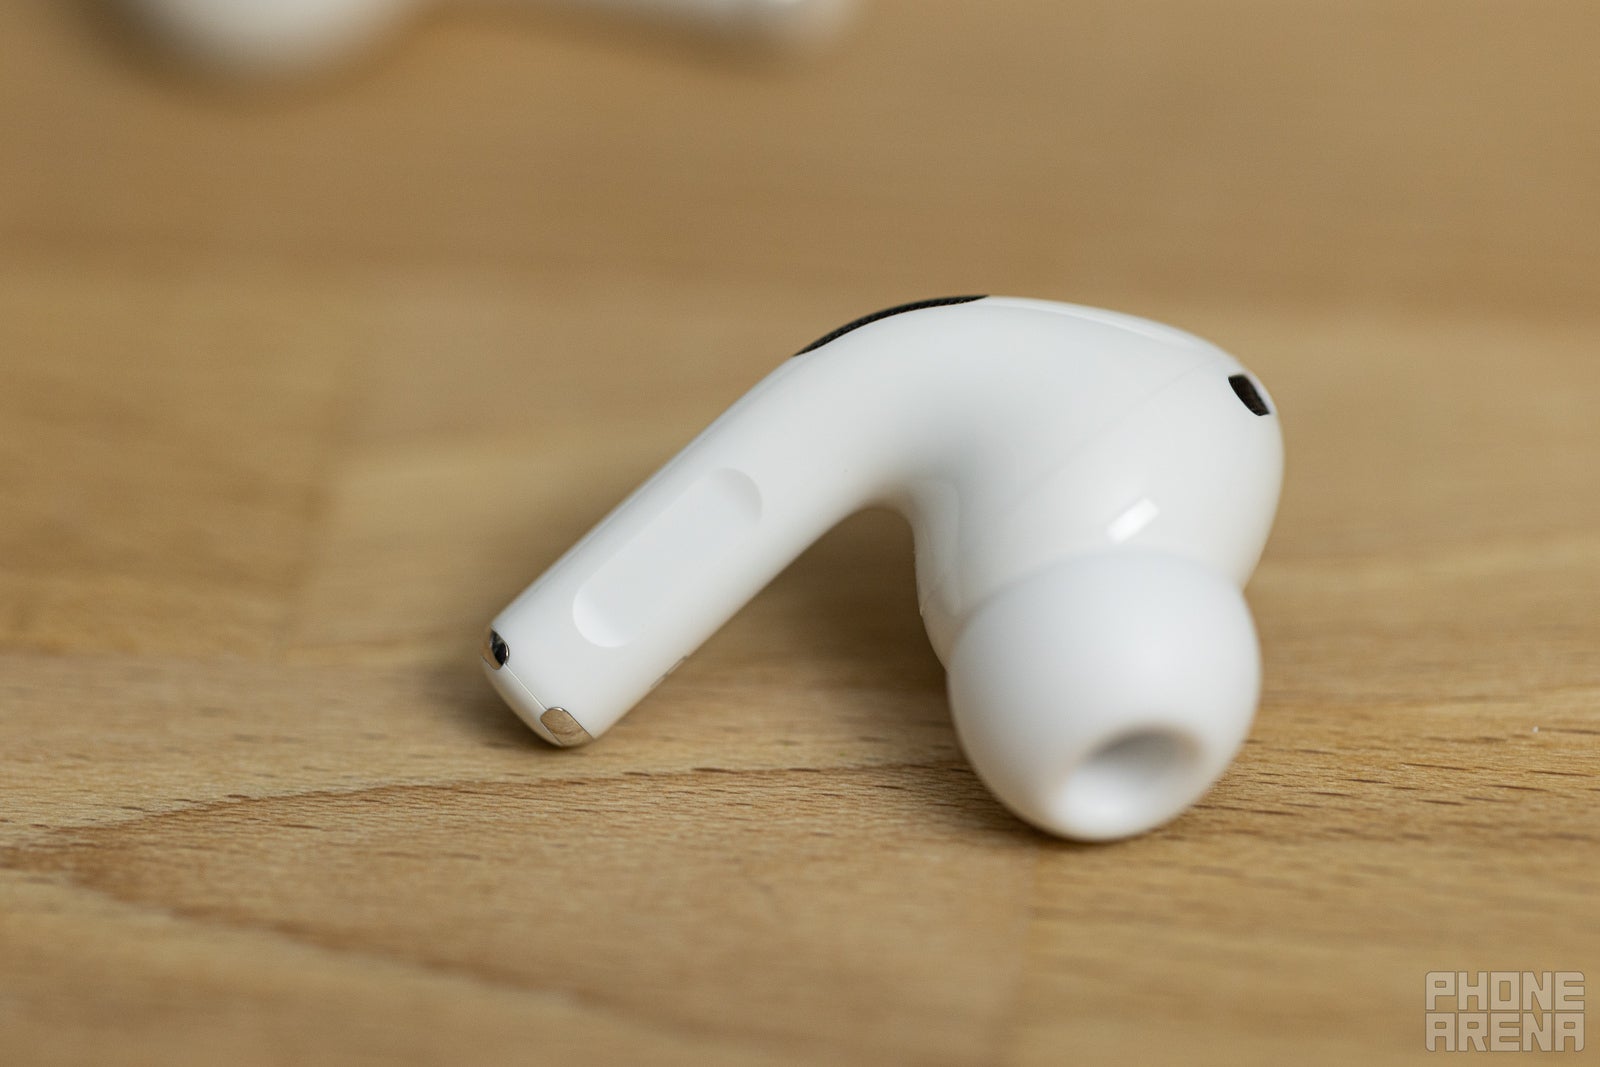 The touch control area on AirPods Pro 2 (shown here) is identical to the one found on AirPods Pro (first generation), but it supports one new important gesture - AirPods Pro 2 vs AirPods Pro comparison: What&#039;s different?